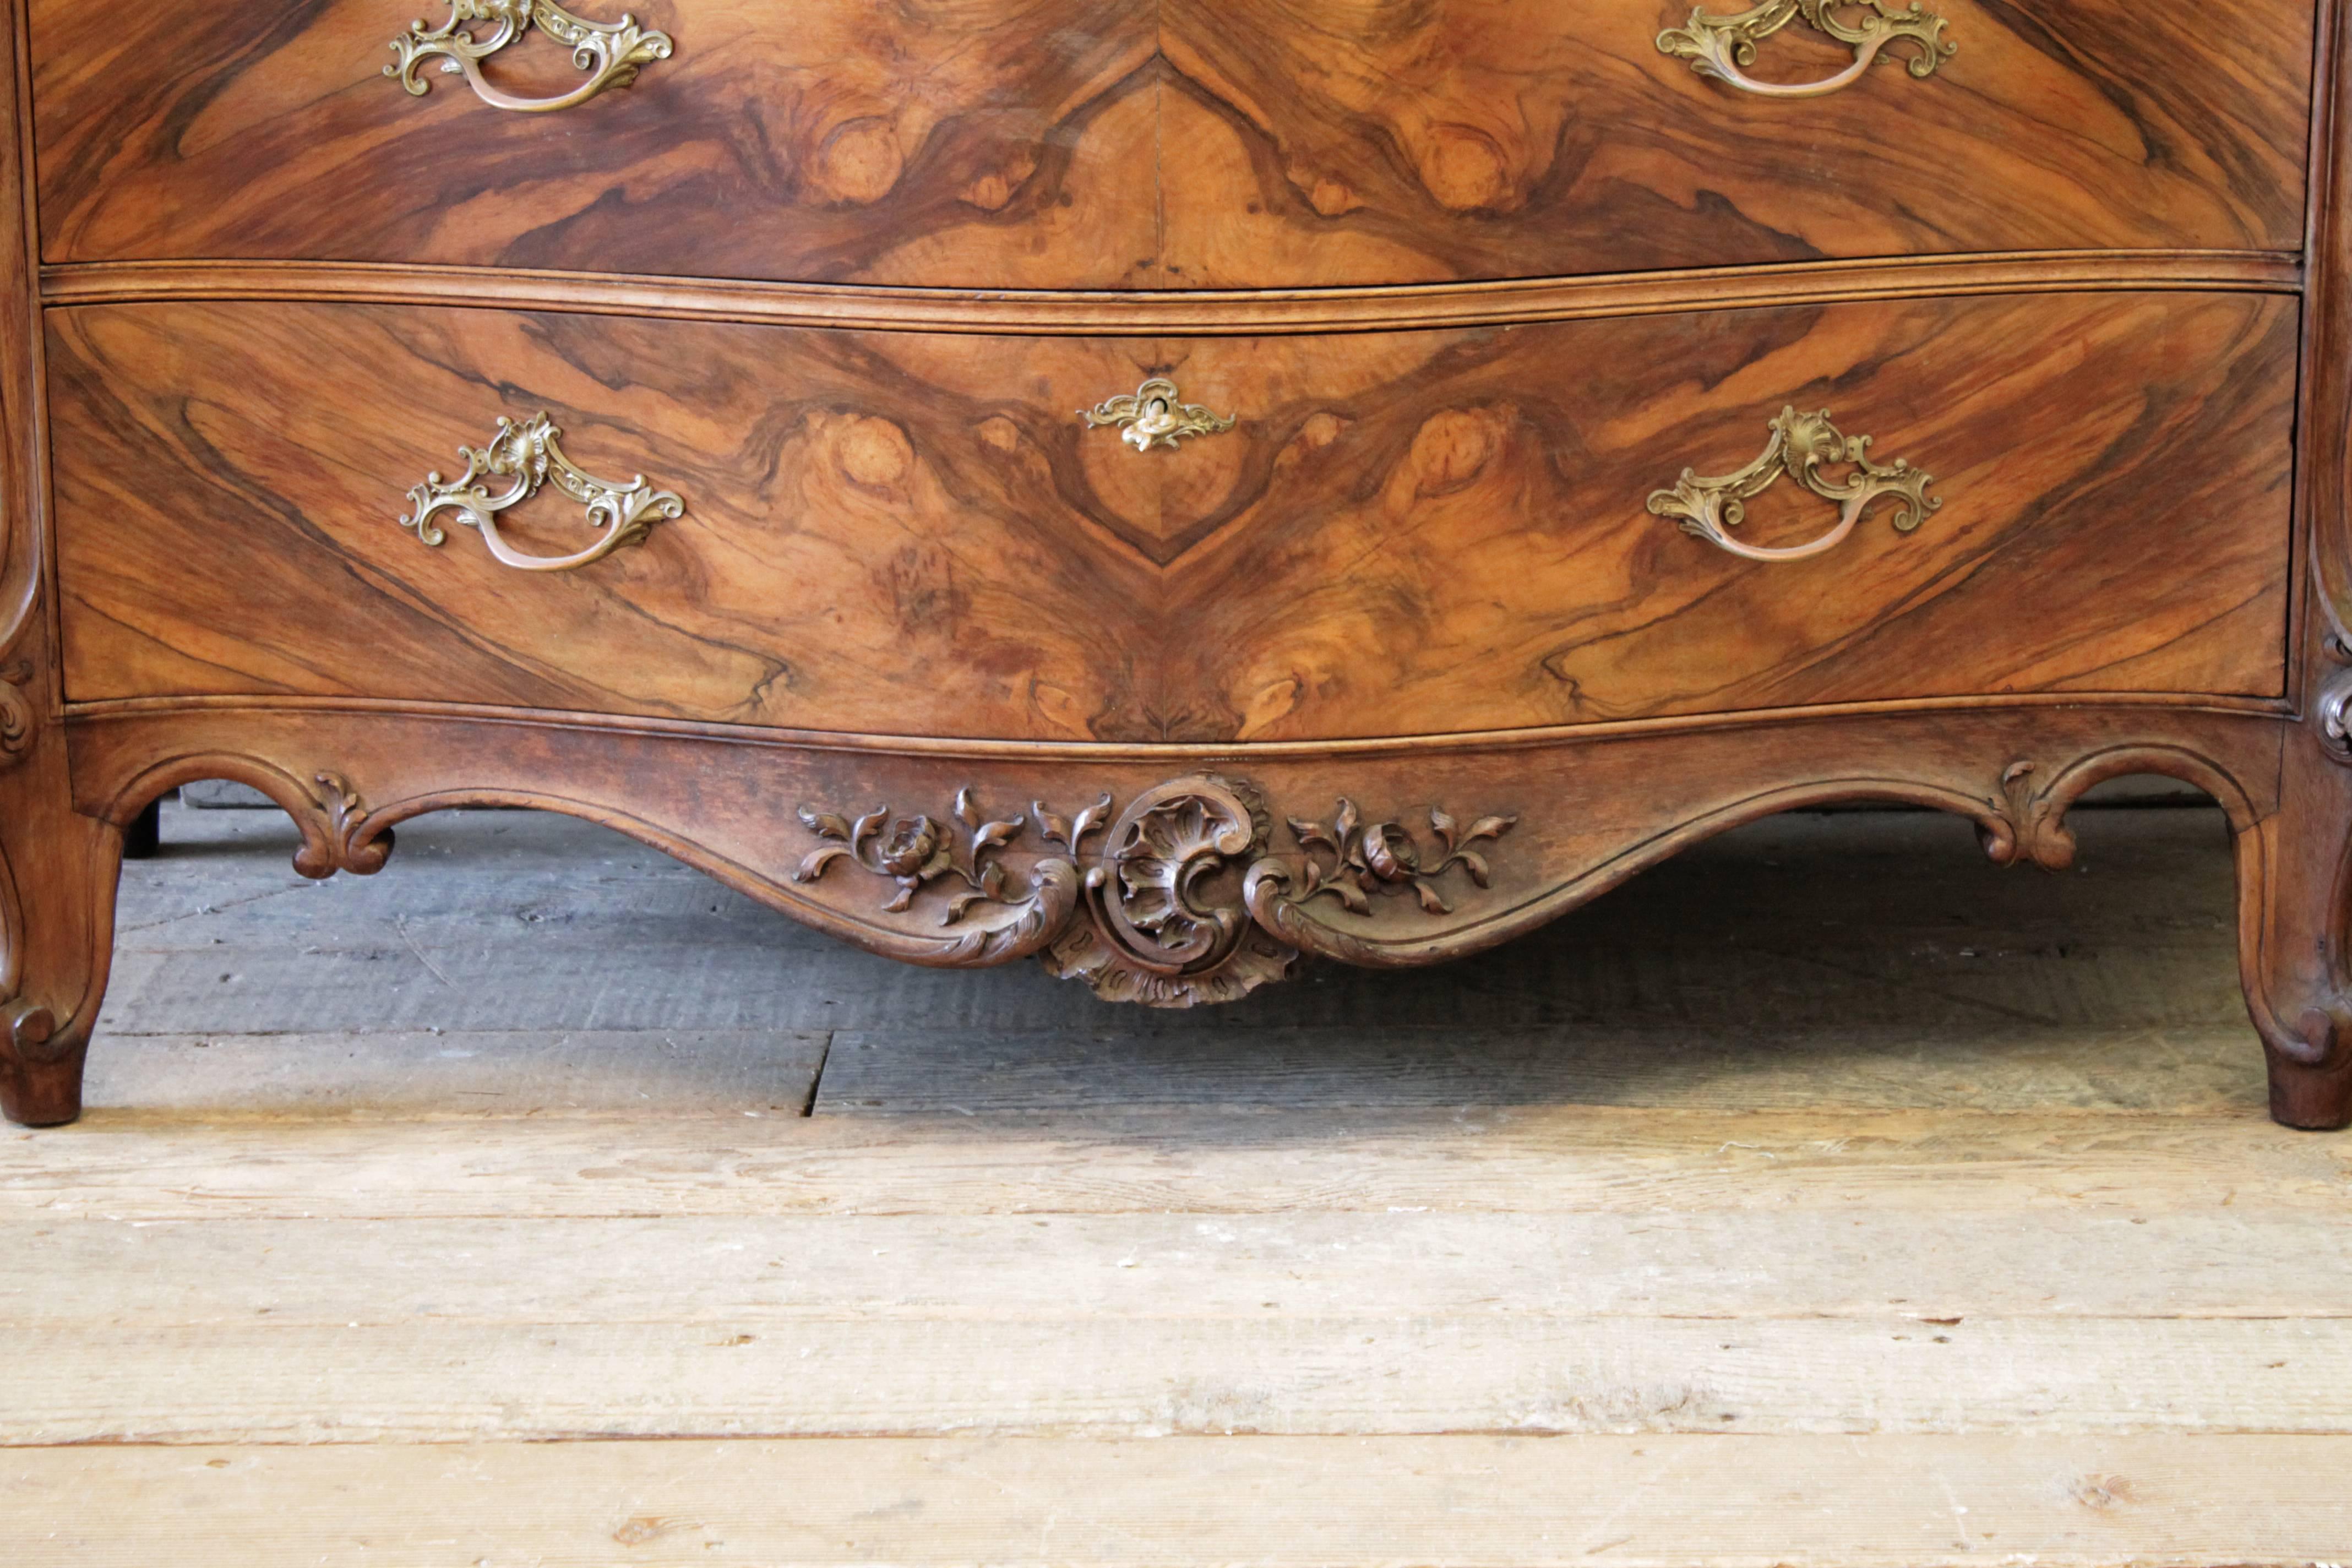 European 19th Century Chest of Drawers in BookMatch Crotch English Walnut